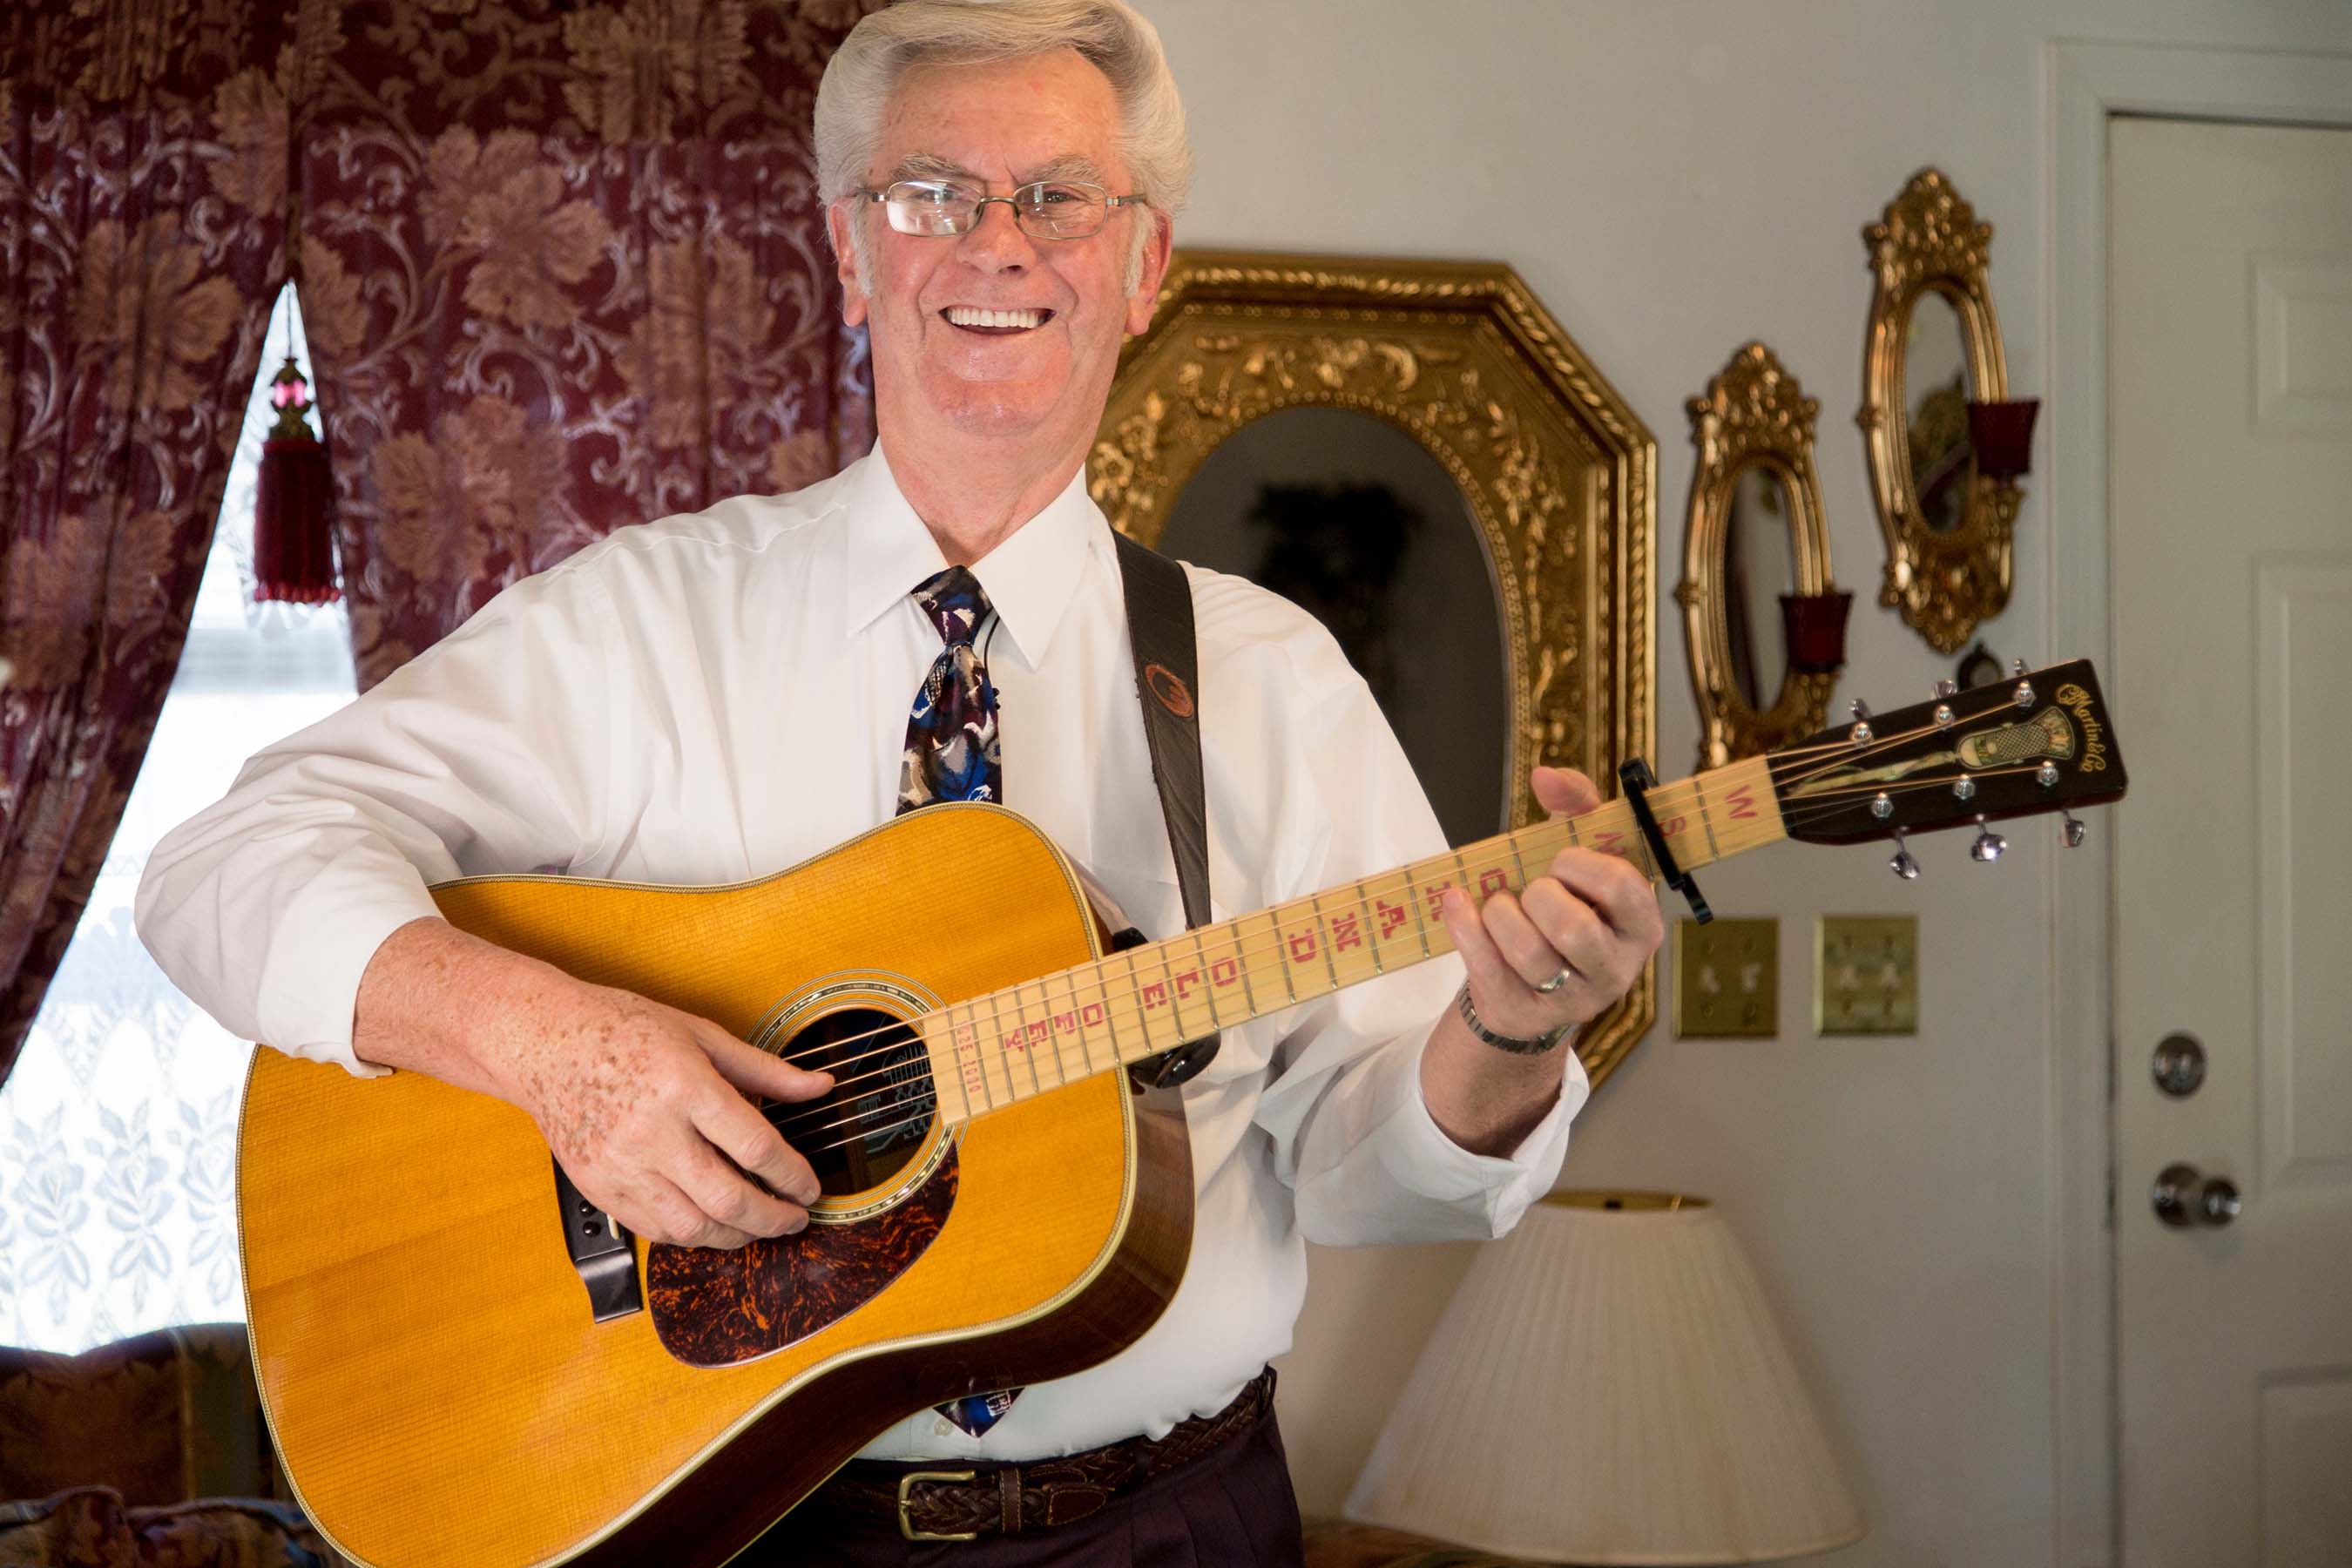 Lee Allen has been playing bluegrass music on his guitar for 50 years.